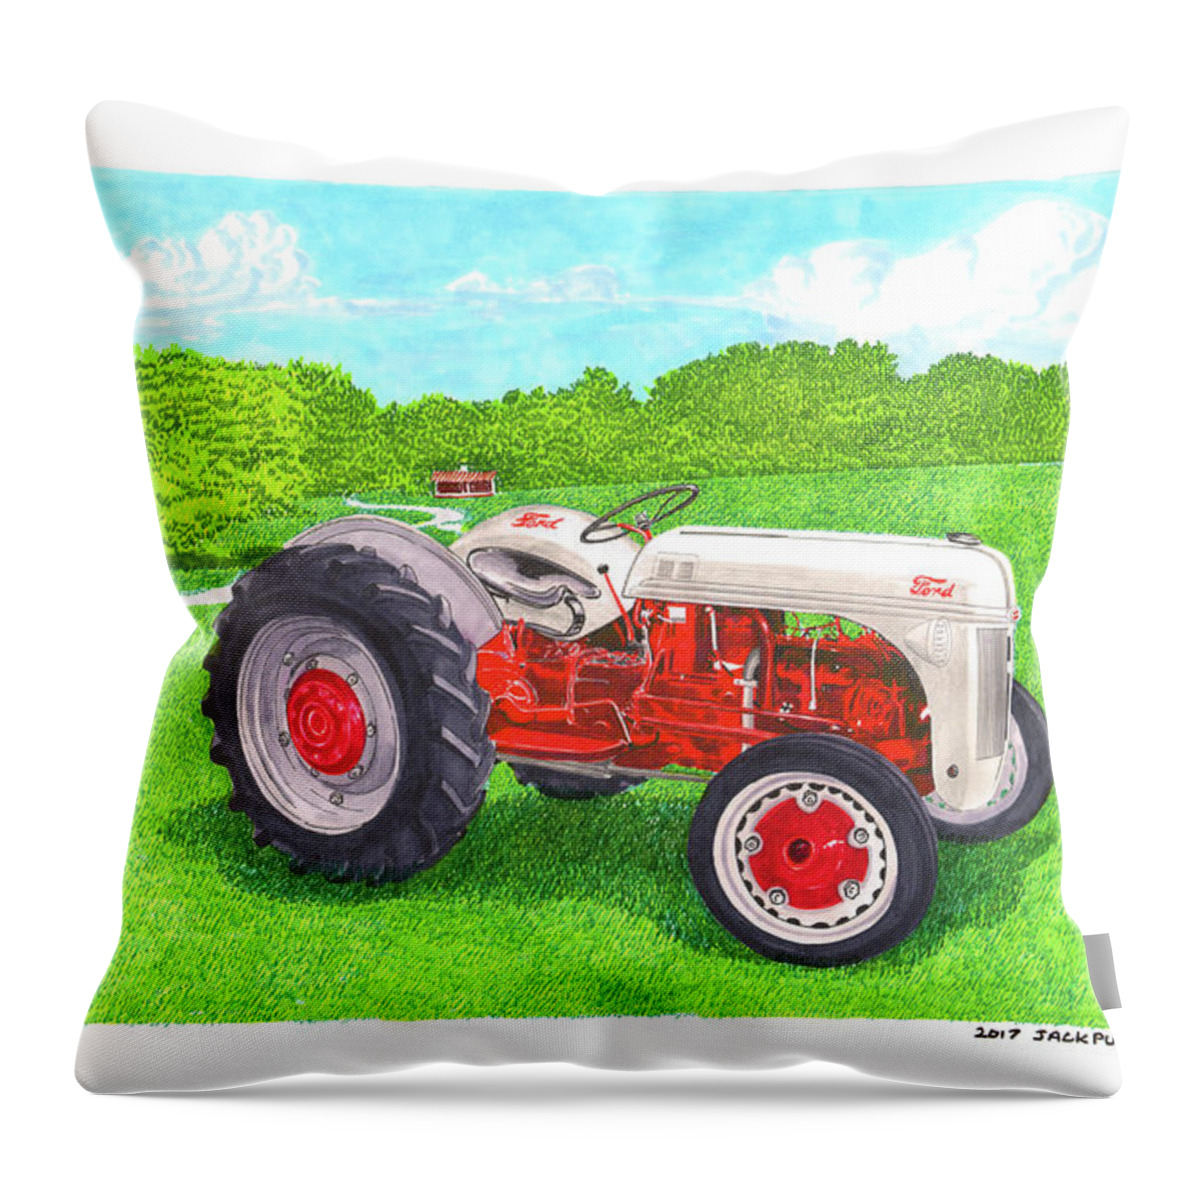 Vintage Farm Tractor Throw Pillow featuring the painting Ford Tractor 1941 by Jack Pumphrey